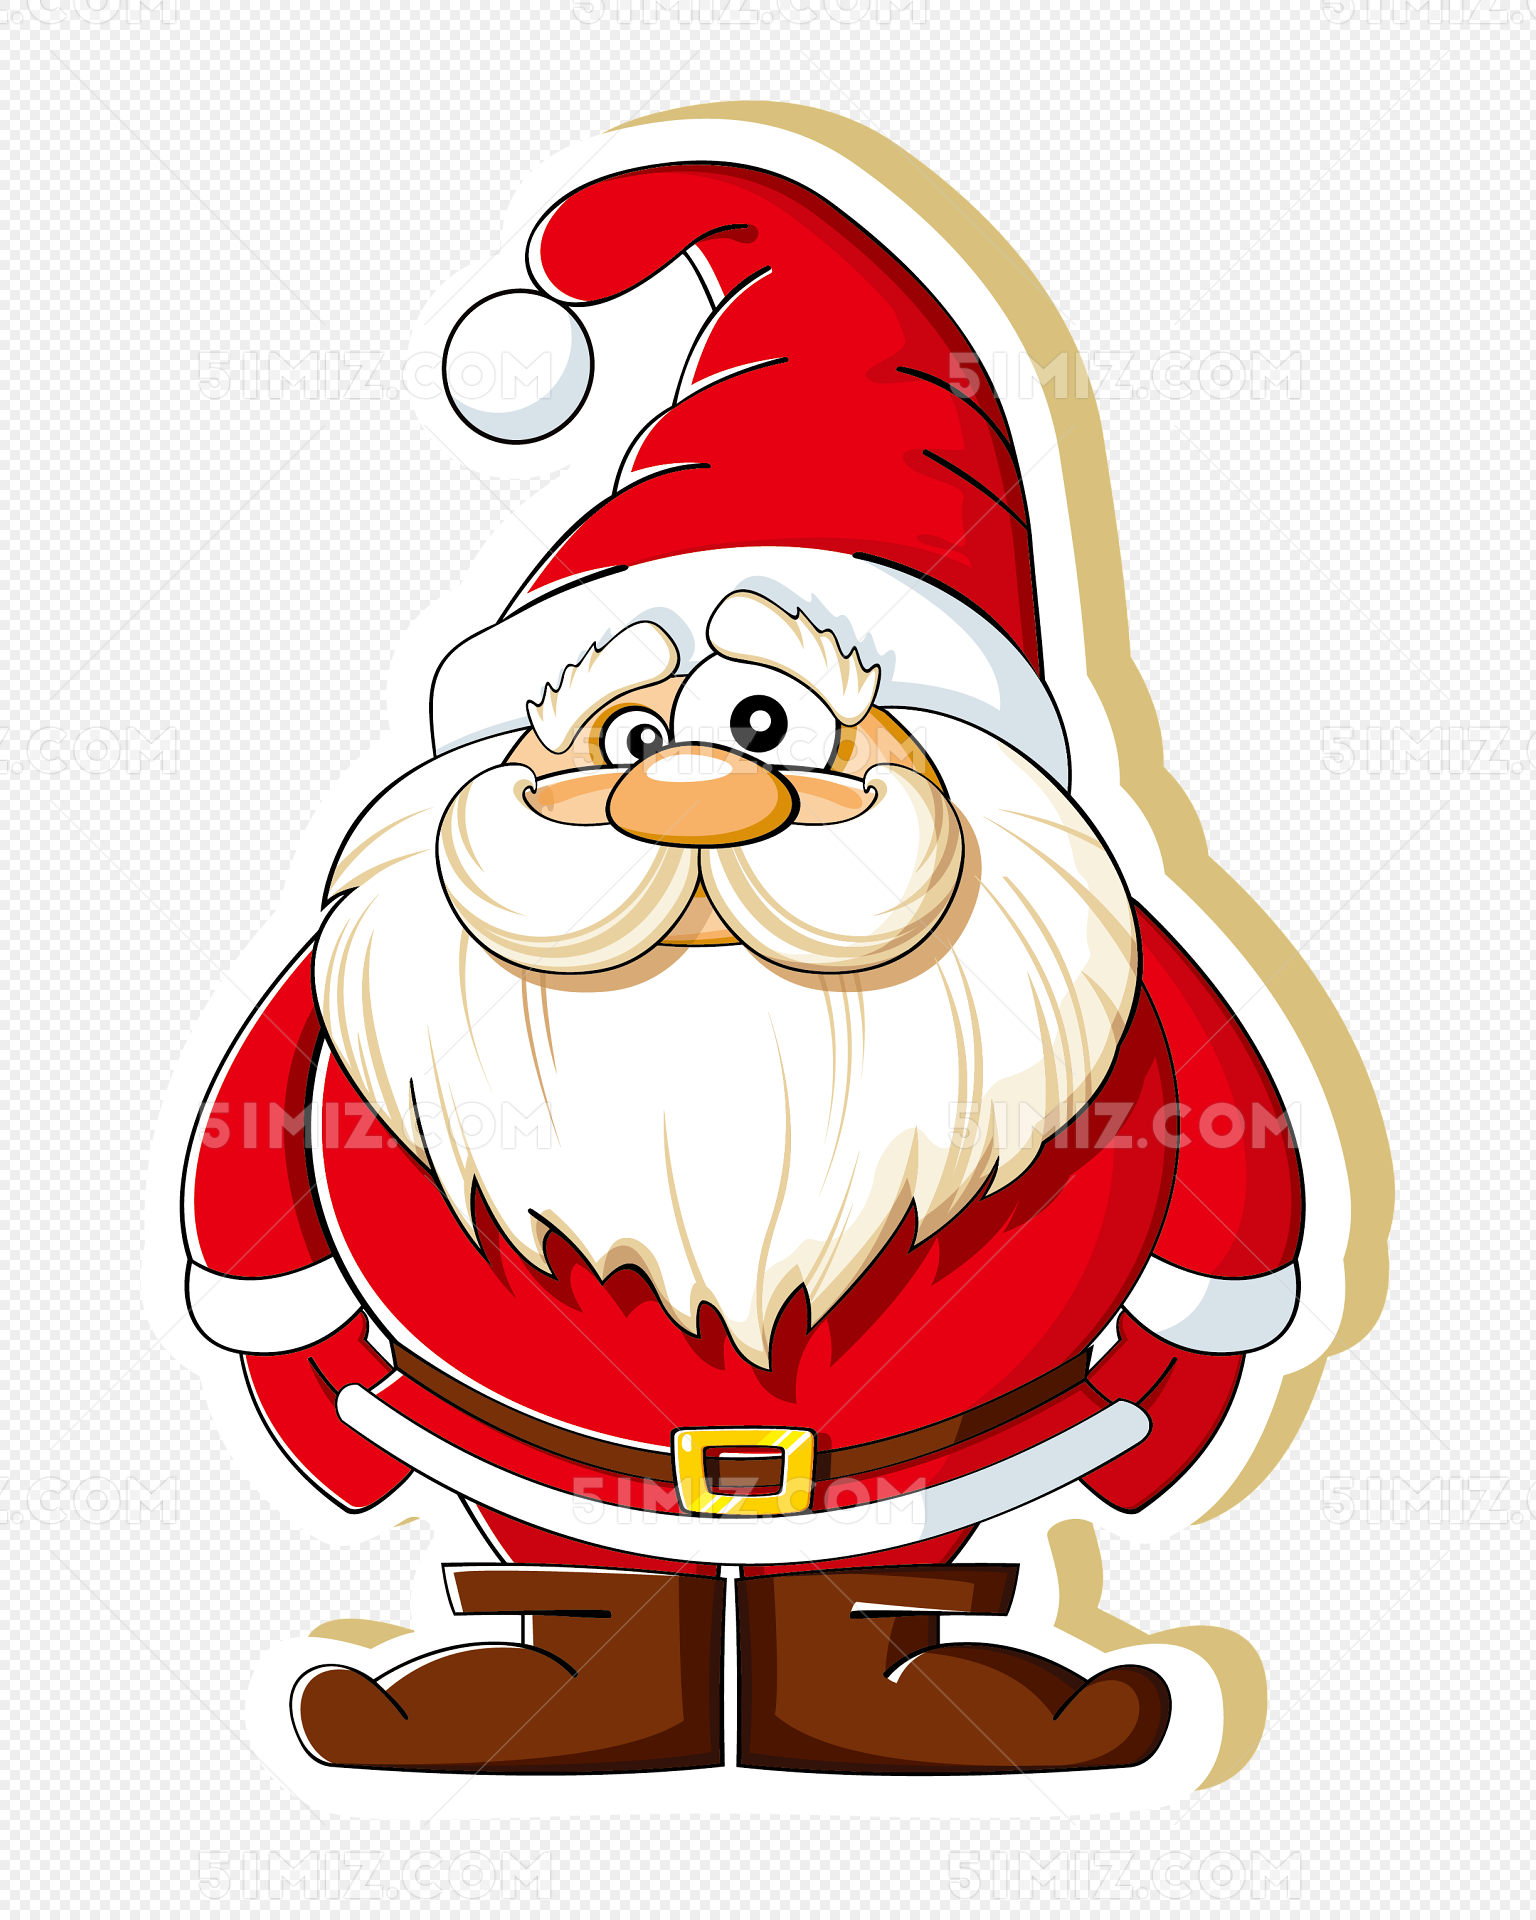 Premium Photo | Santa claus standing isolated on white surface - full ...